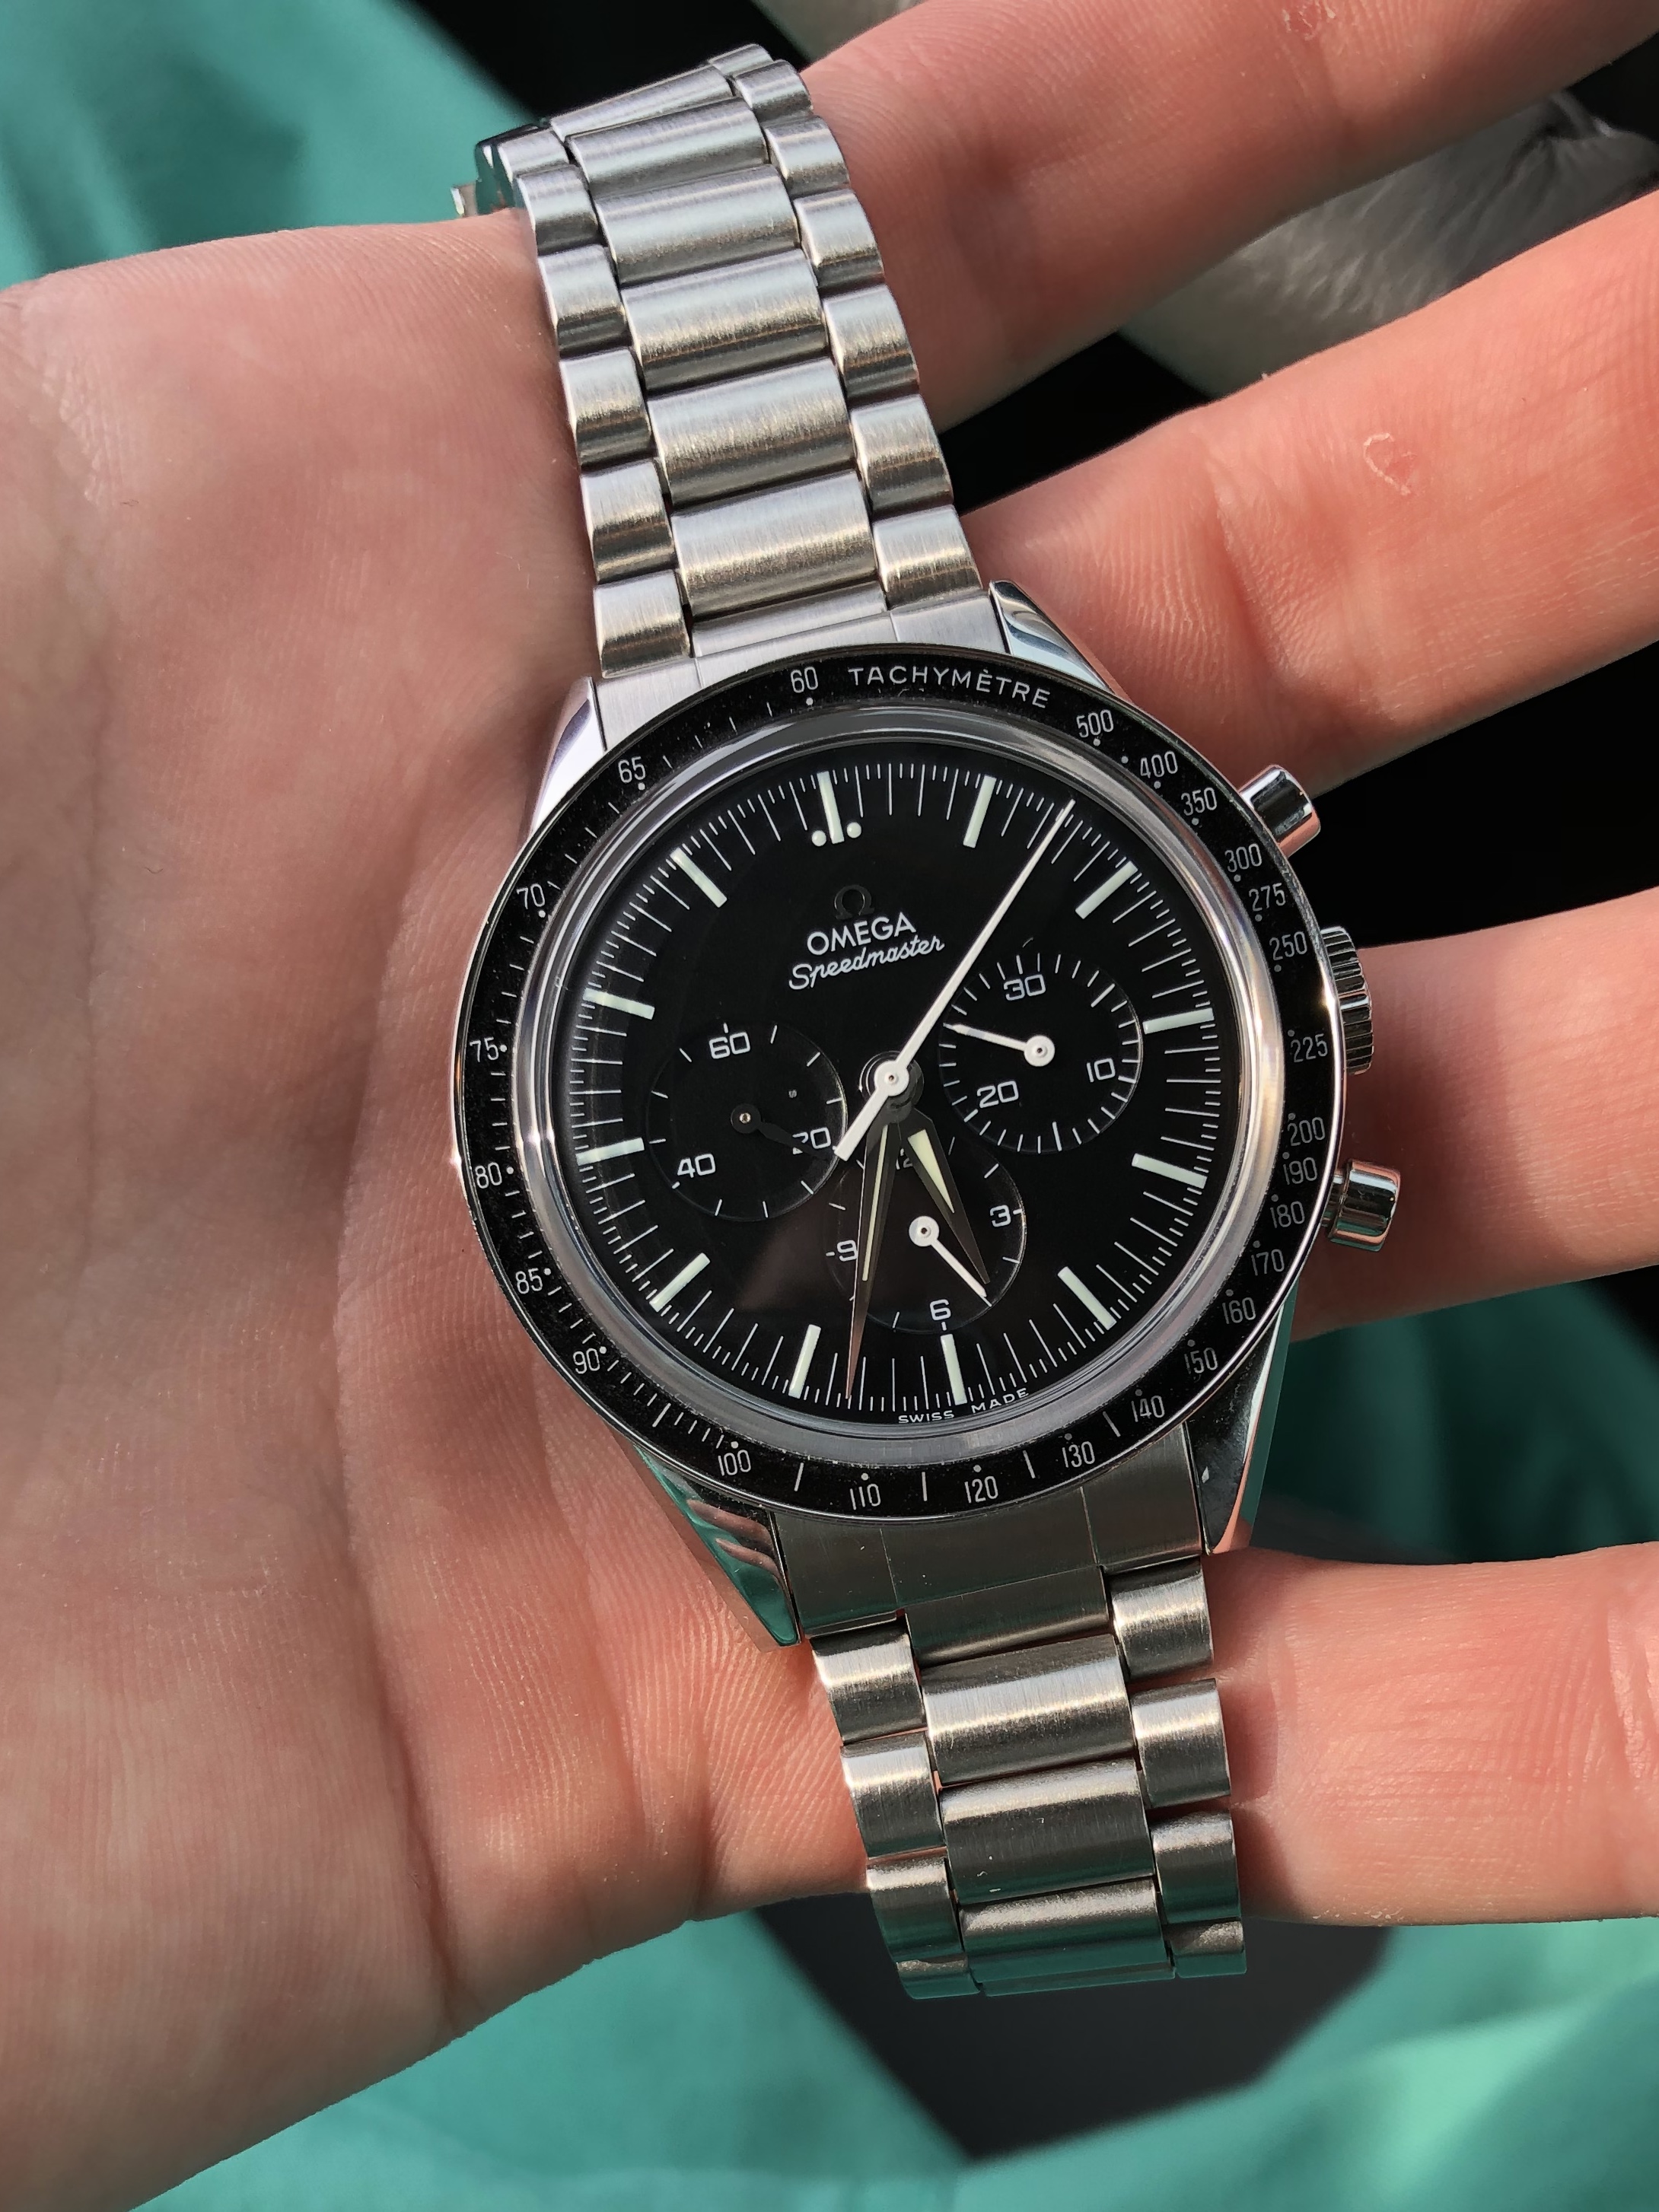 First Omega in Space on the 1125/617 